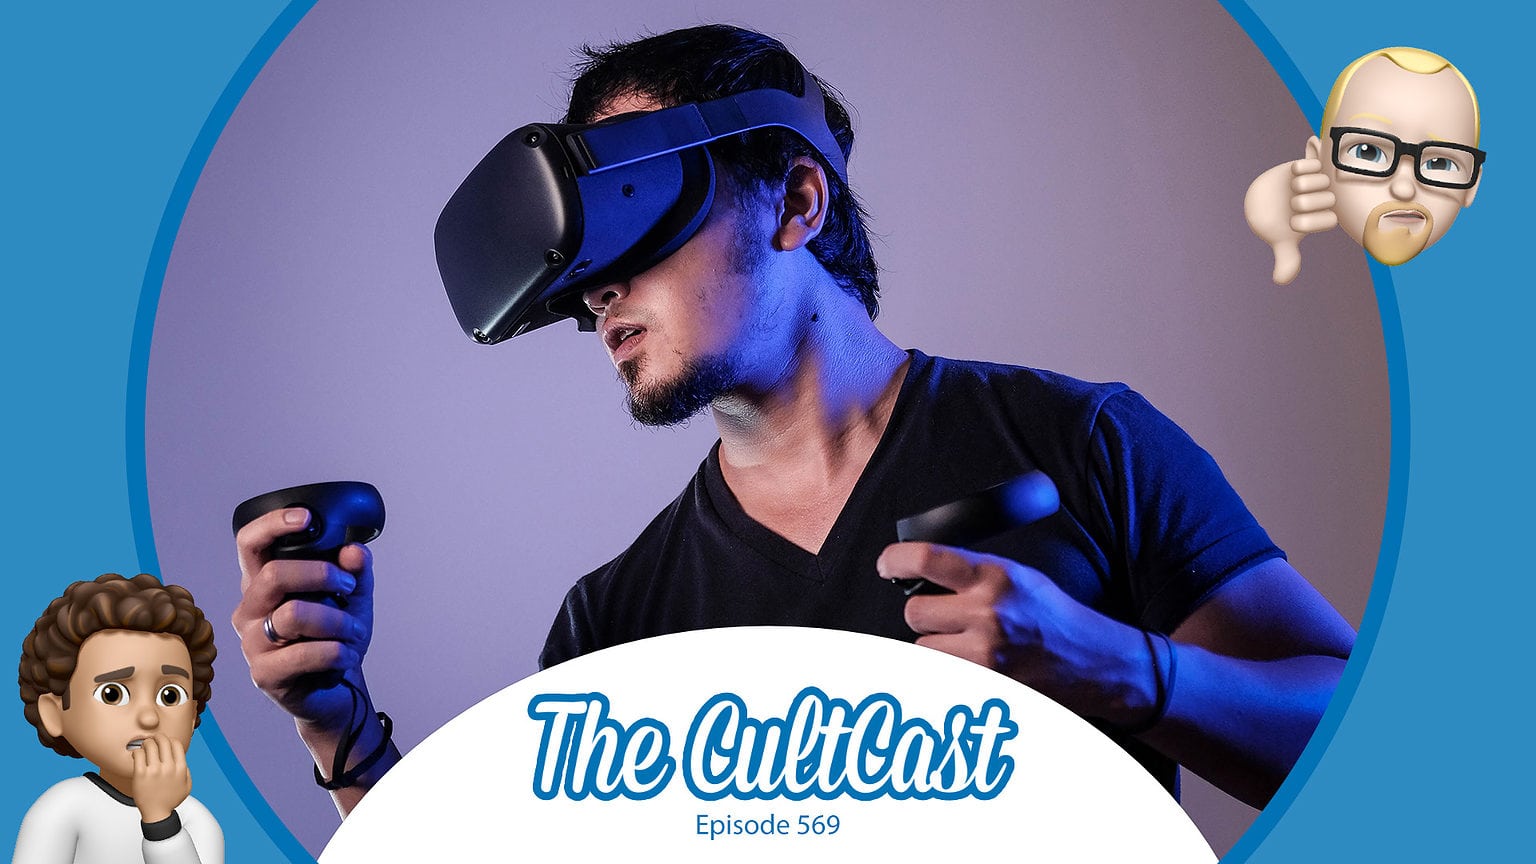 The CultCast Apple podcast: When Apple finally rolls out its mixed-reality headset, will it be a winner?